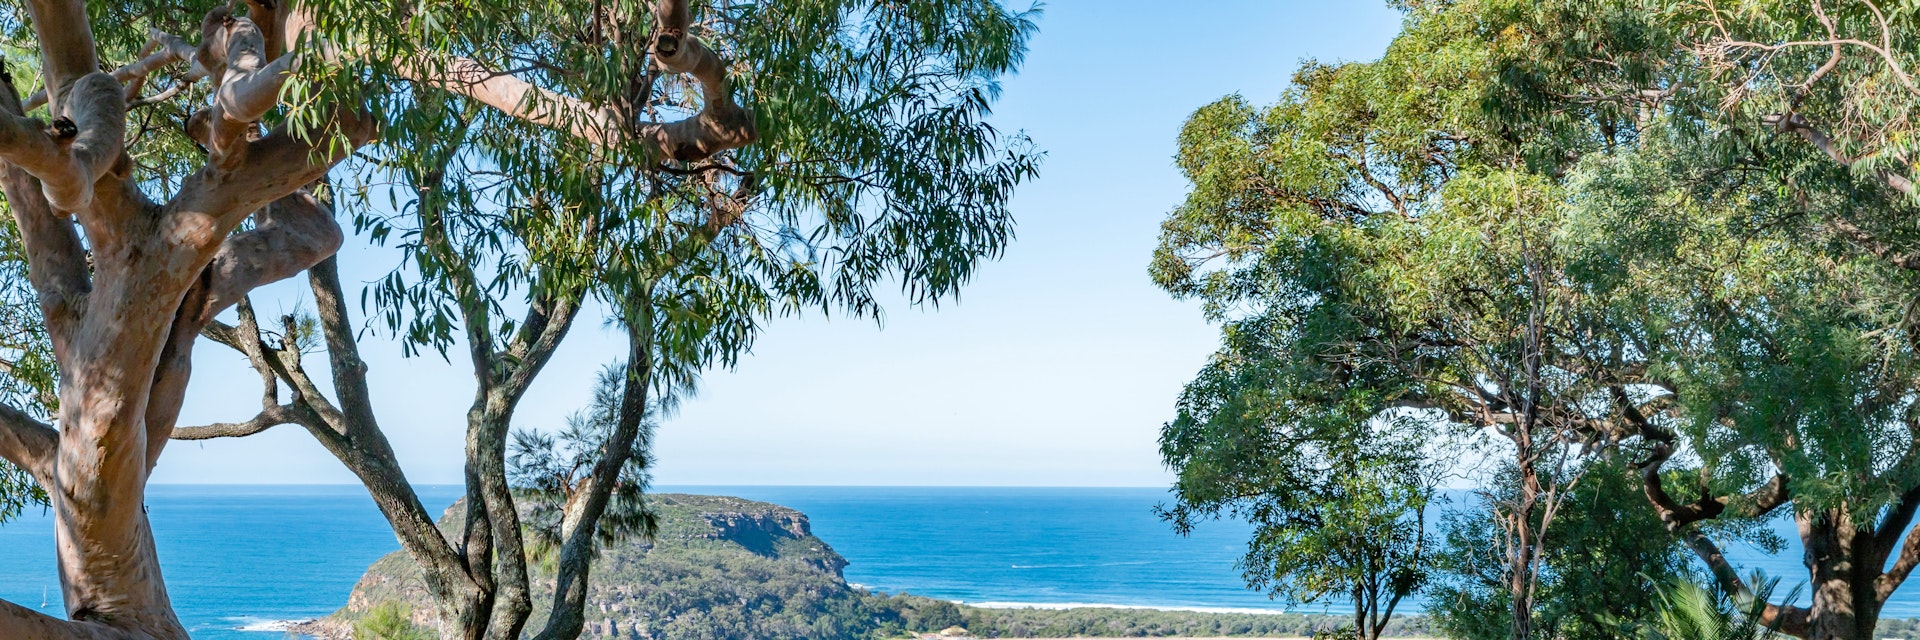 Beautiful Area with stone pavement at West Head Lookout Point and Barrenjoey Head background Blur - stock photo


Sydney NSW Australia - June 5th 2020 - Ku-ring-gai Chase National Park on a sunny winter afternoon